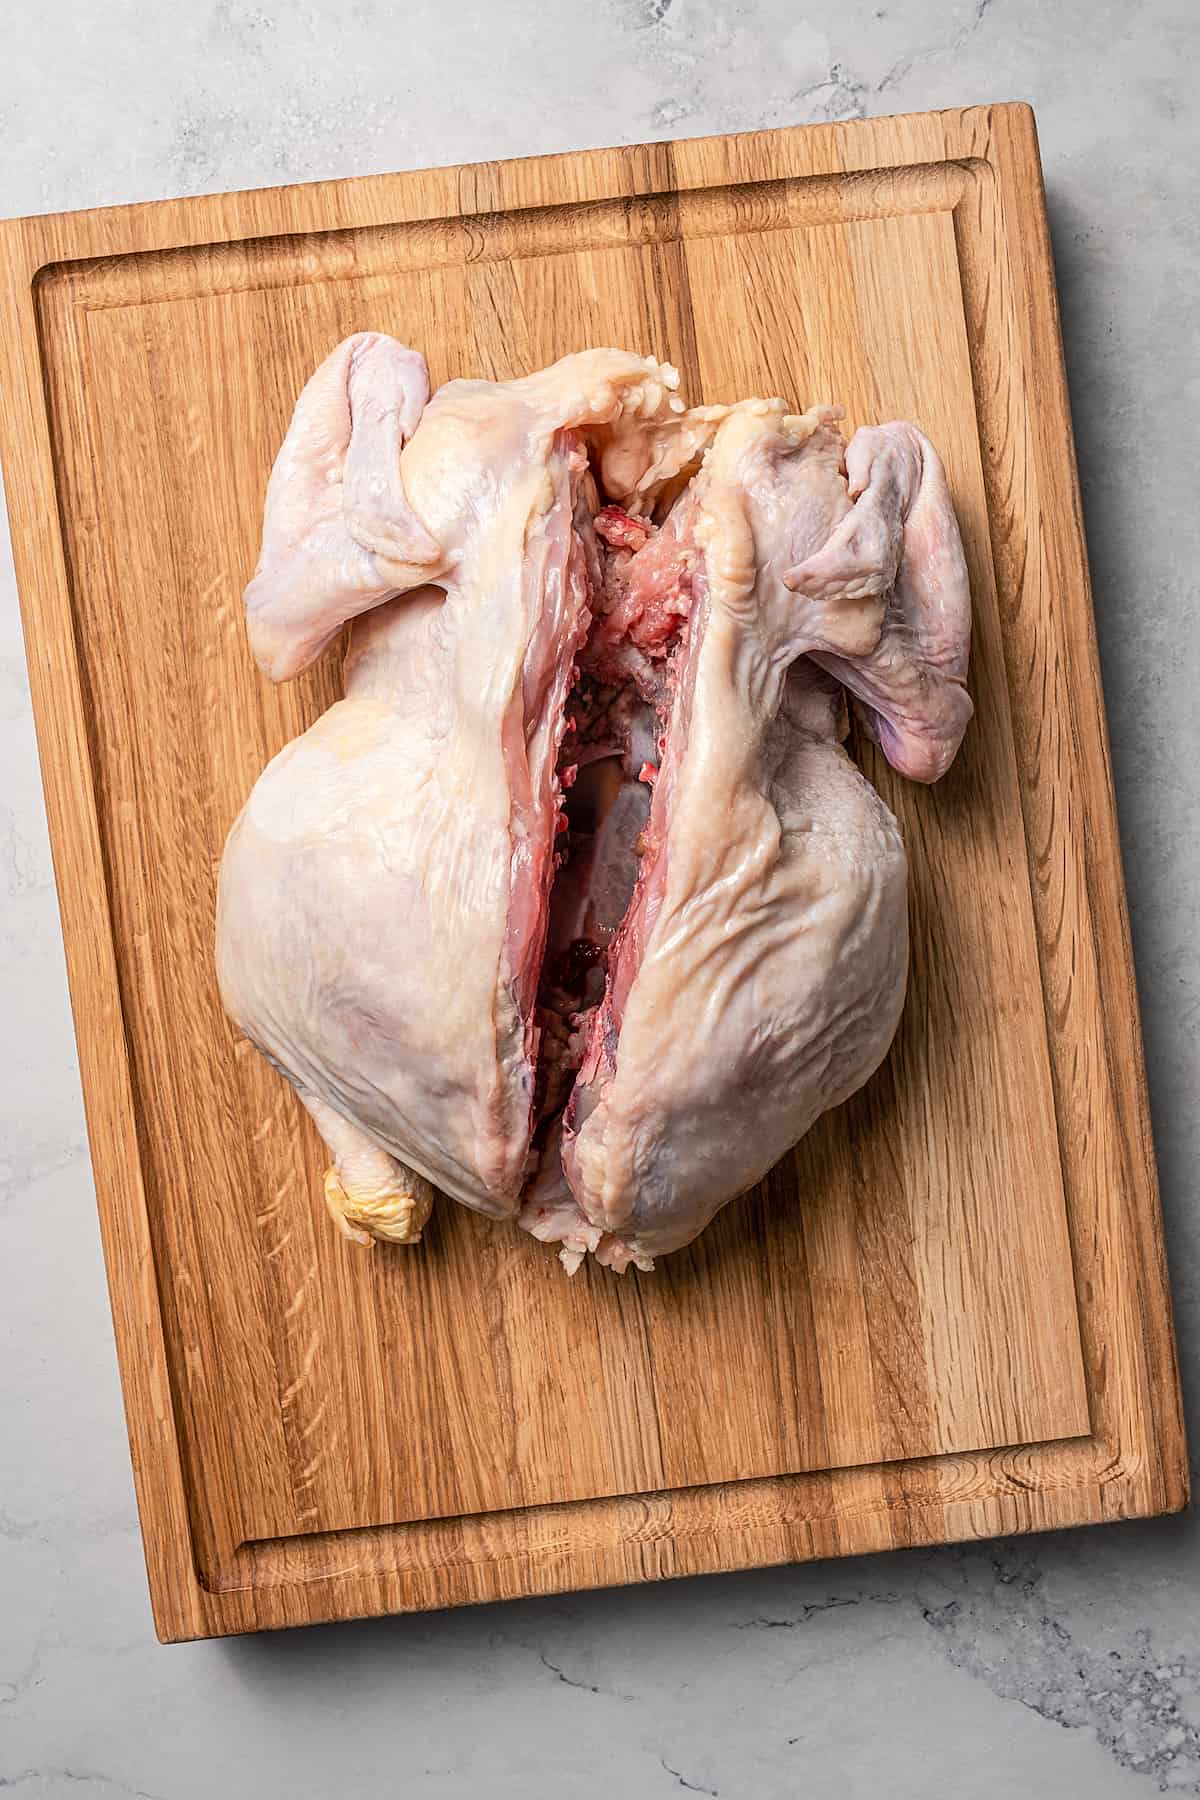 Overhead shot of a whole chicken with the backbone removed.